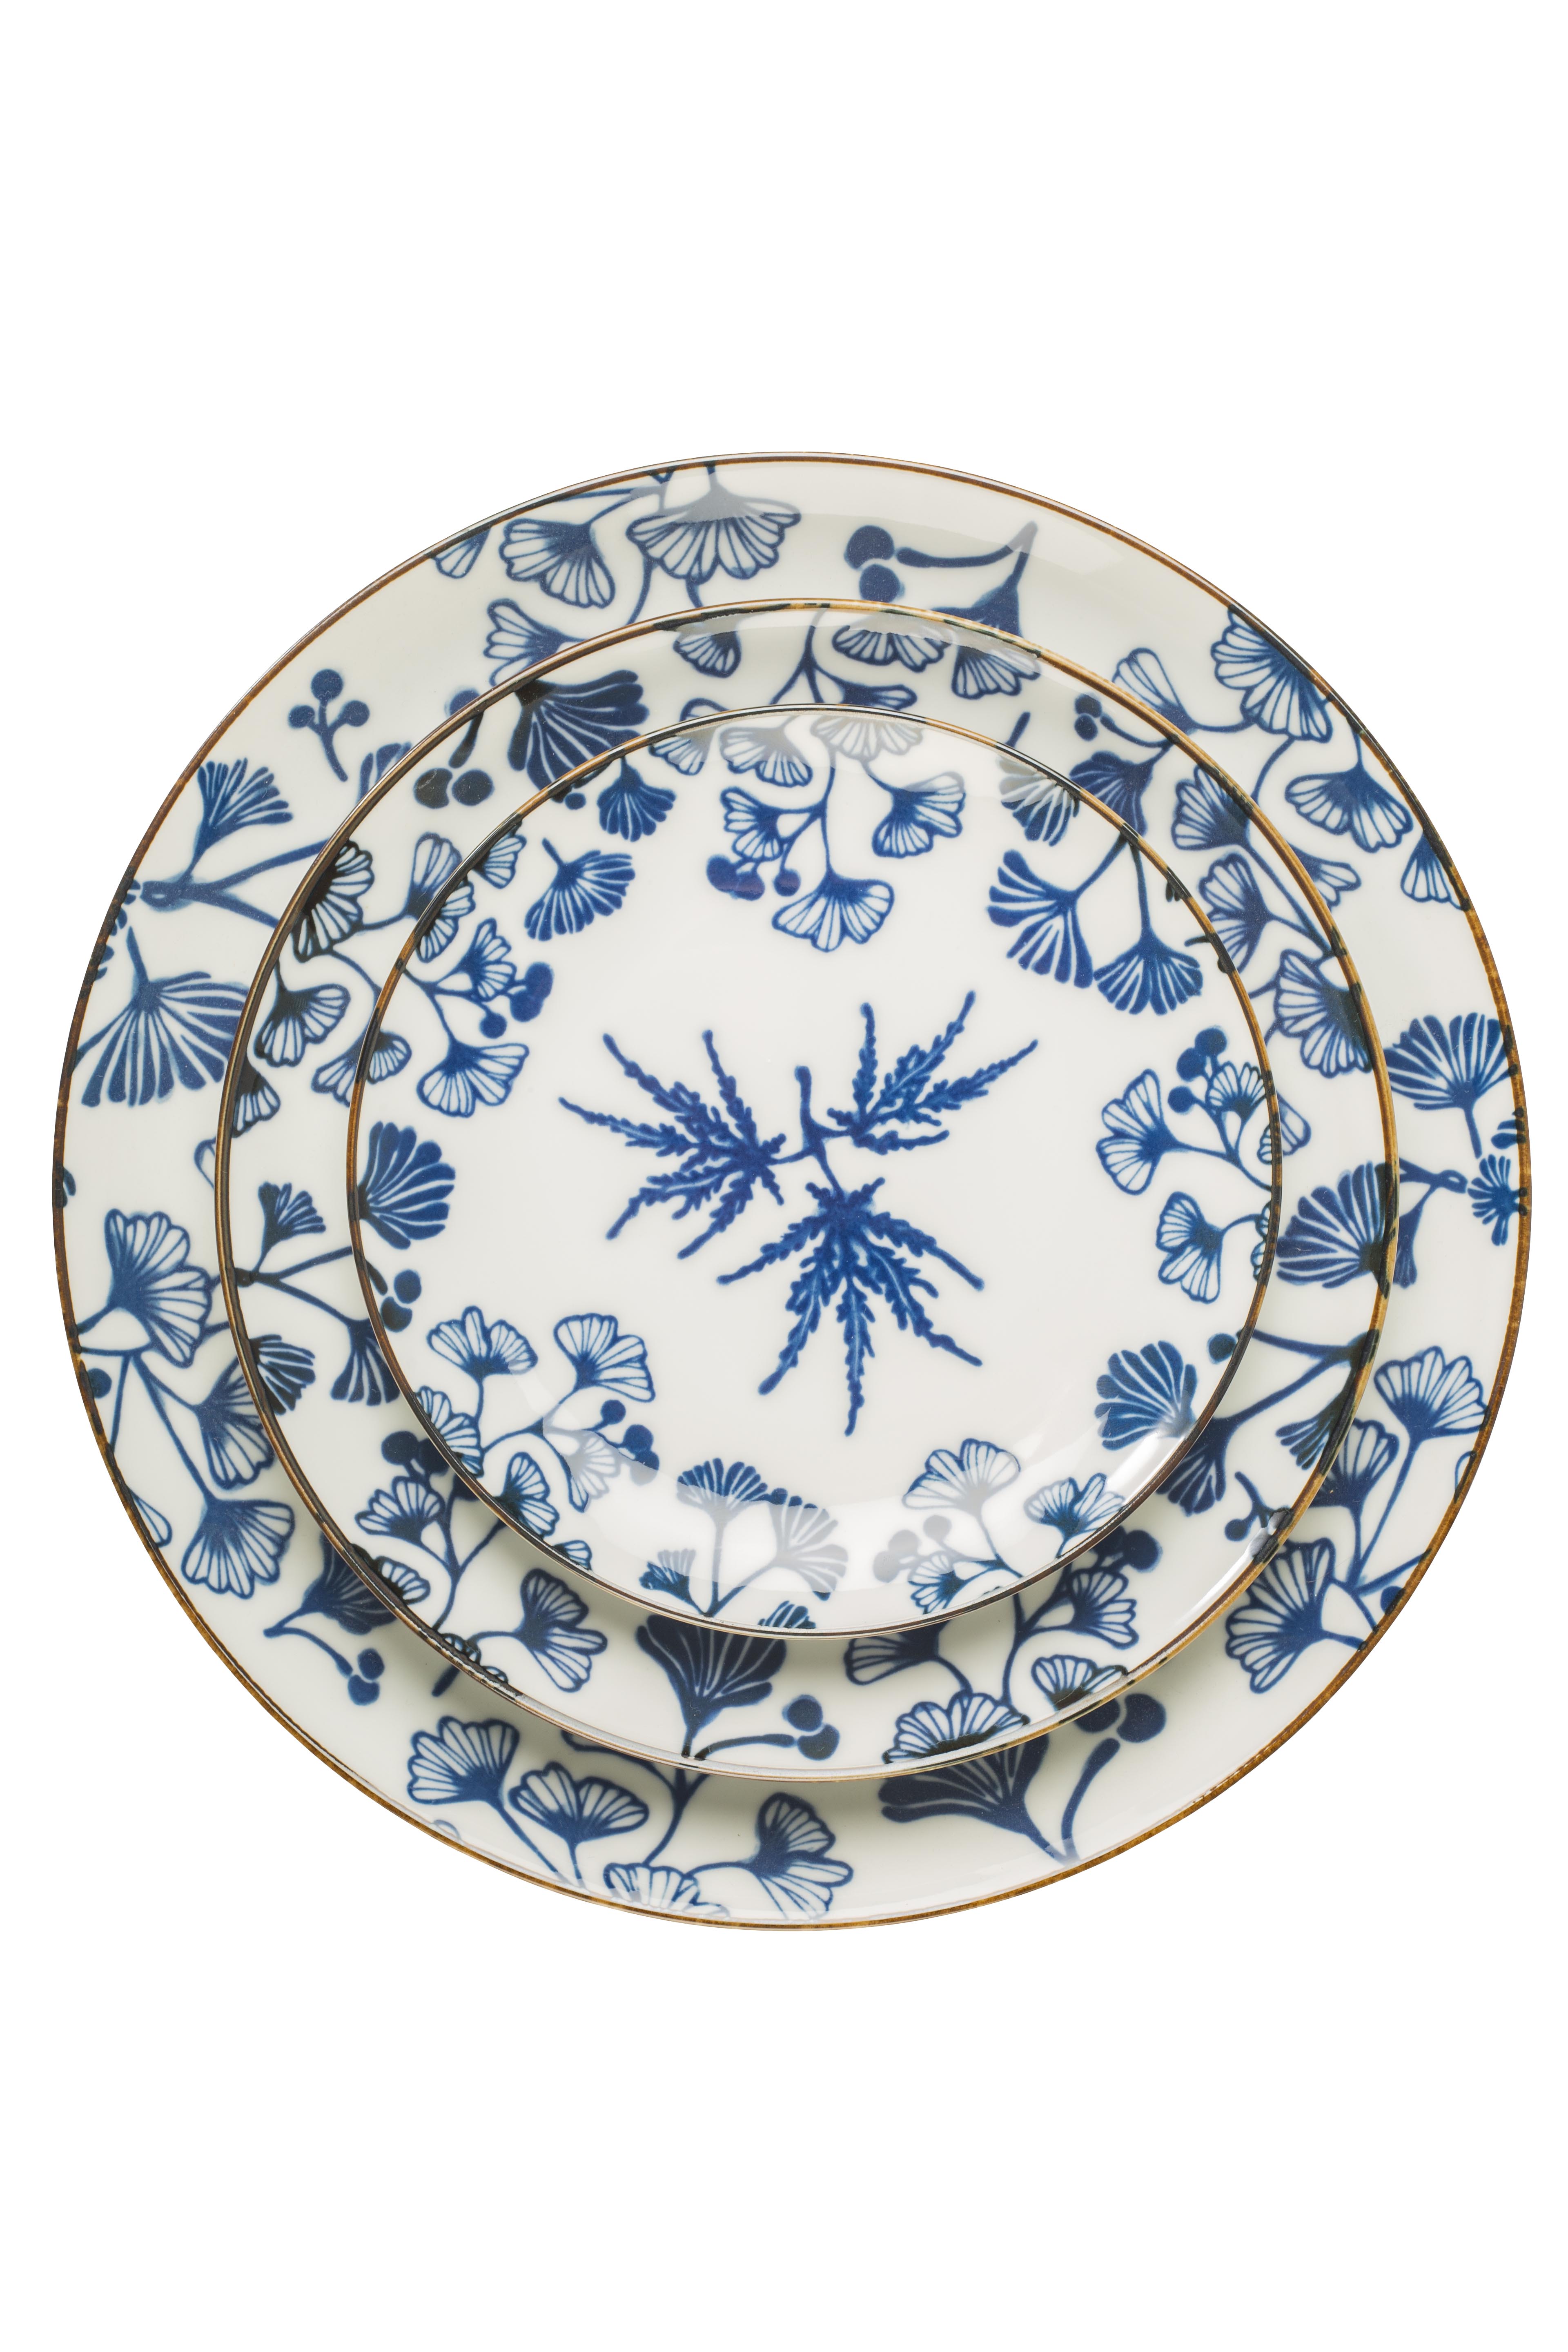 Beyond Designs Home Unveils a Collection of Exquisite Tableware